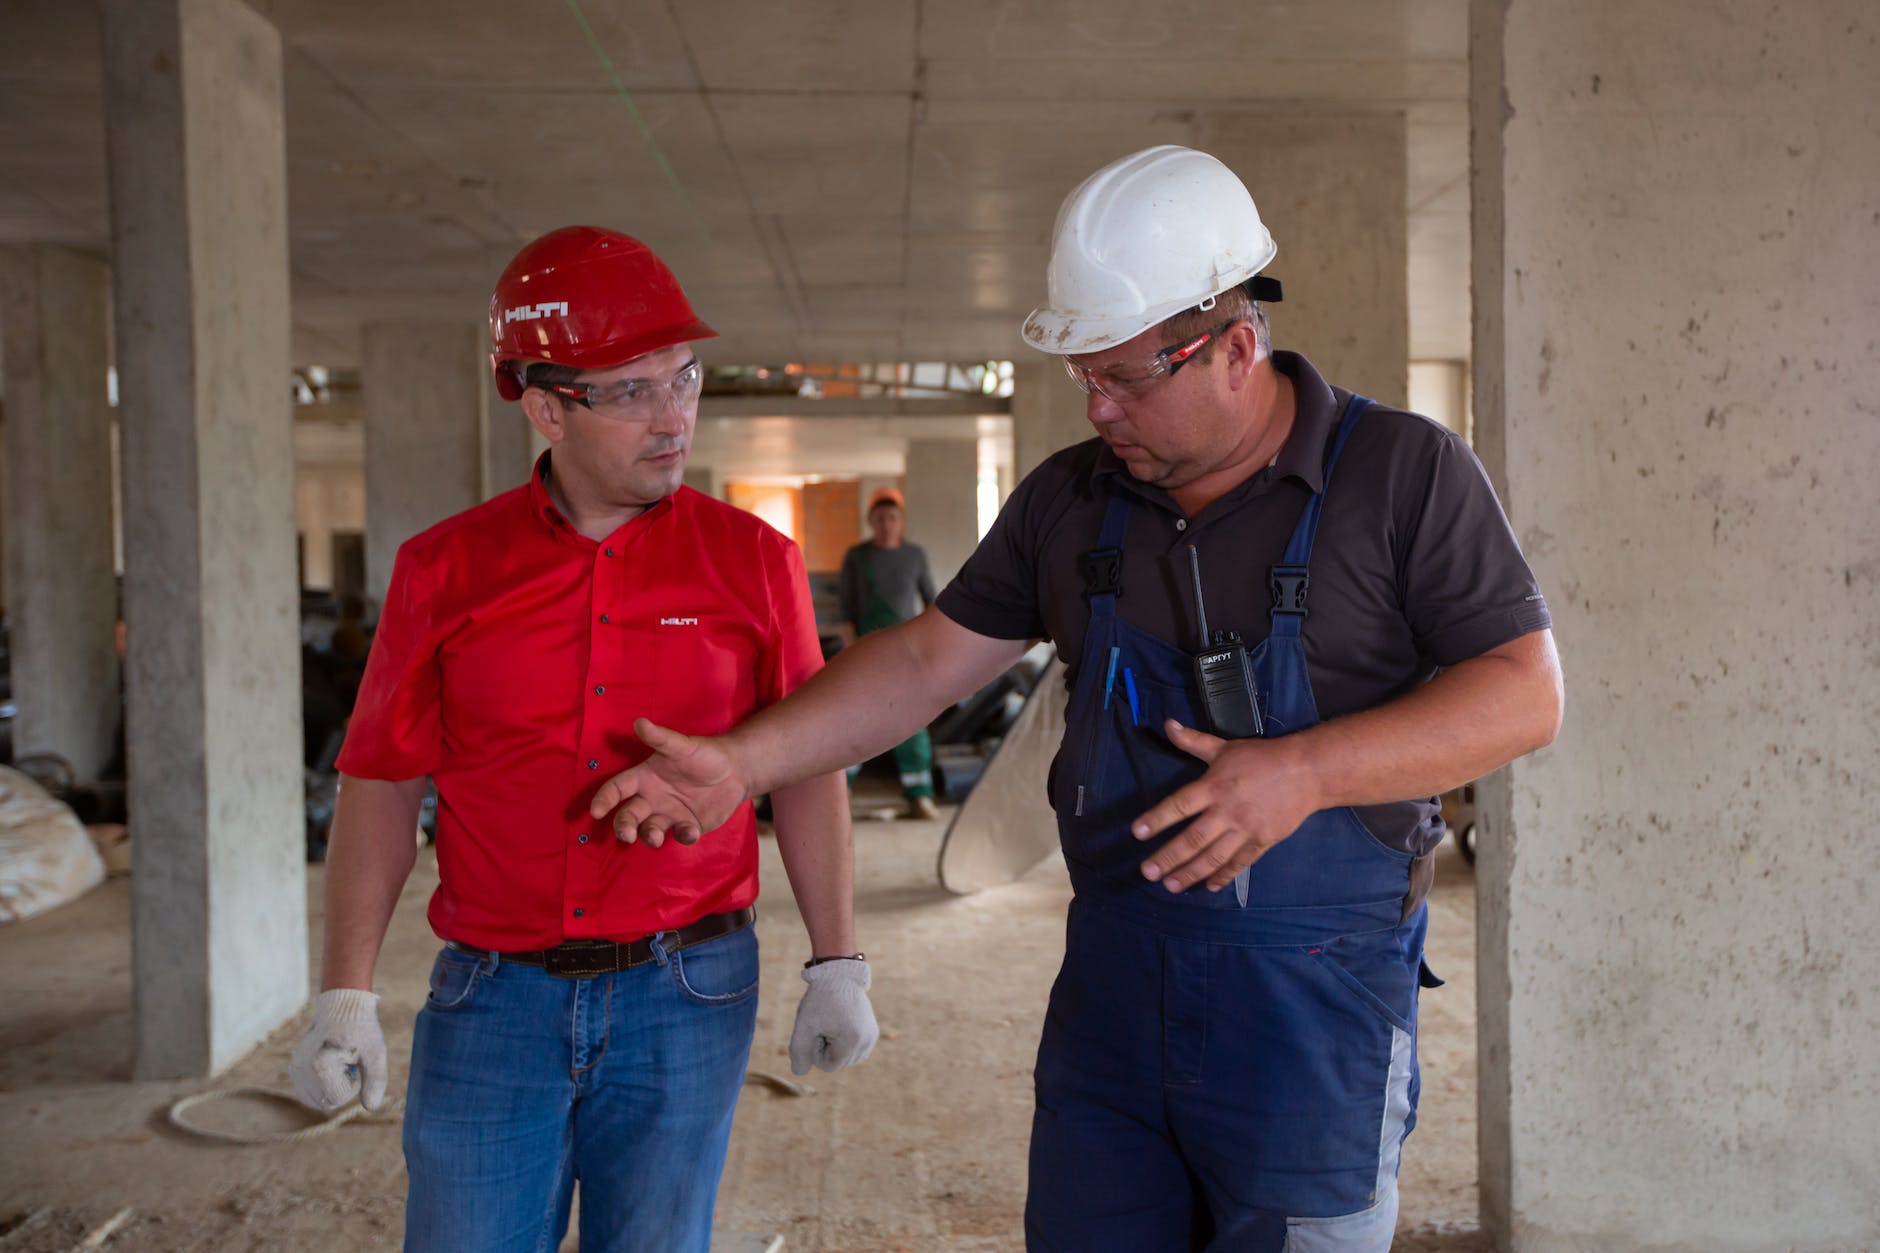 Importance of Safety in Construction Sites